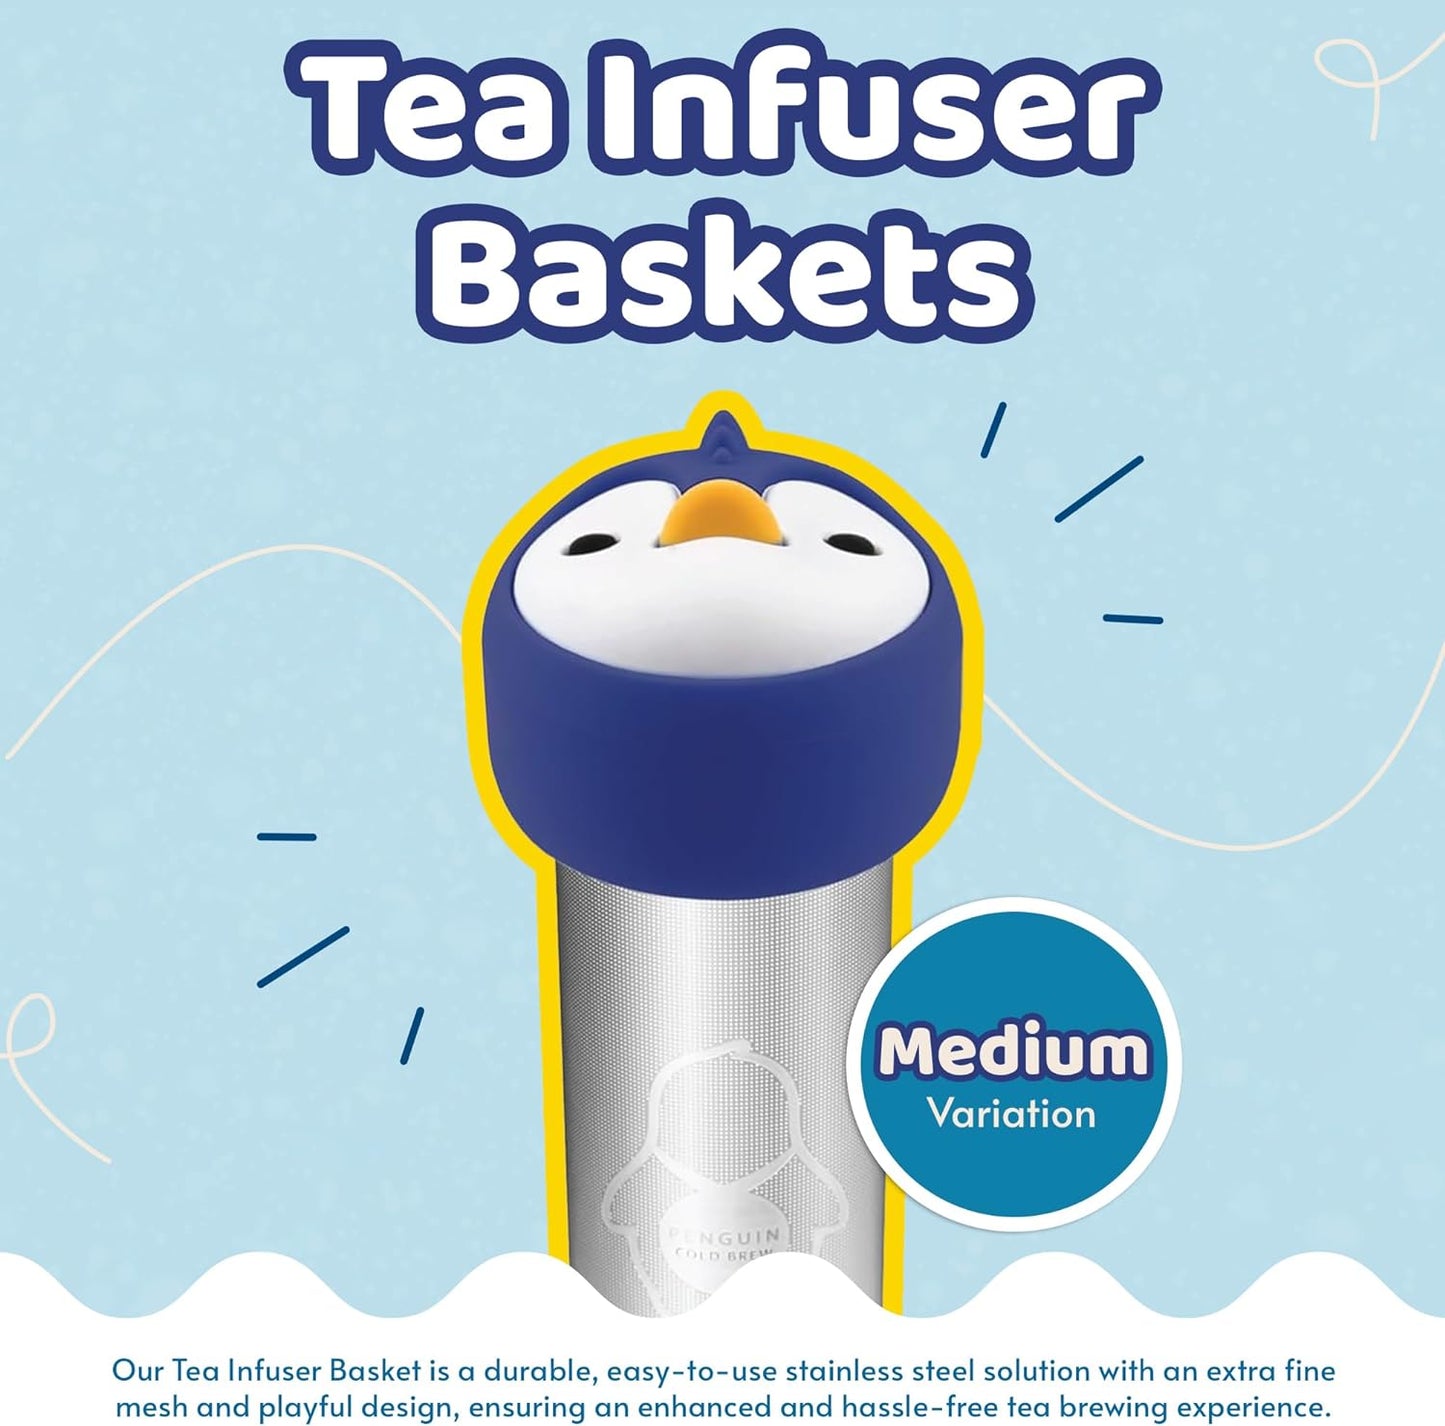 Tea Infuser Baskets - Stainless Steel Strainers for Loose Leaf Tea and Coffee - Extra Fine Metal Micro Mesh Steeper - Reusable, Travel-Friendly